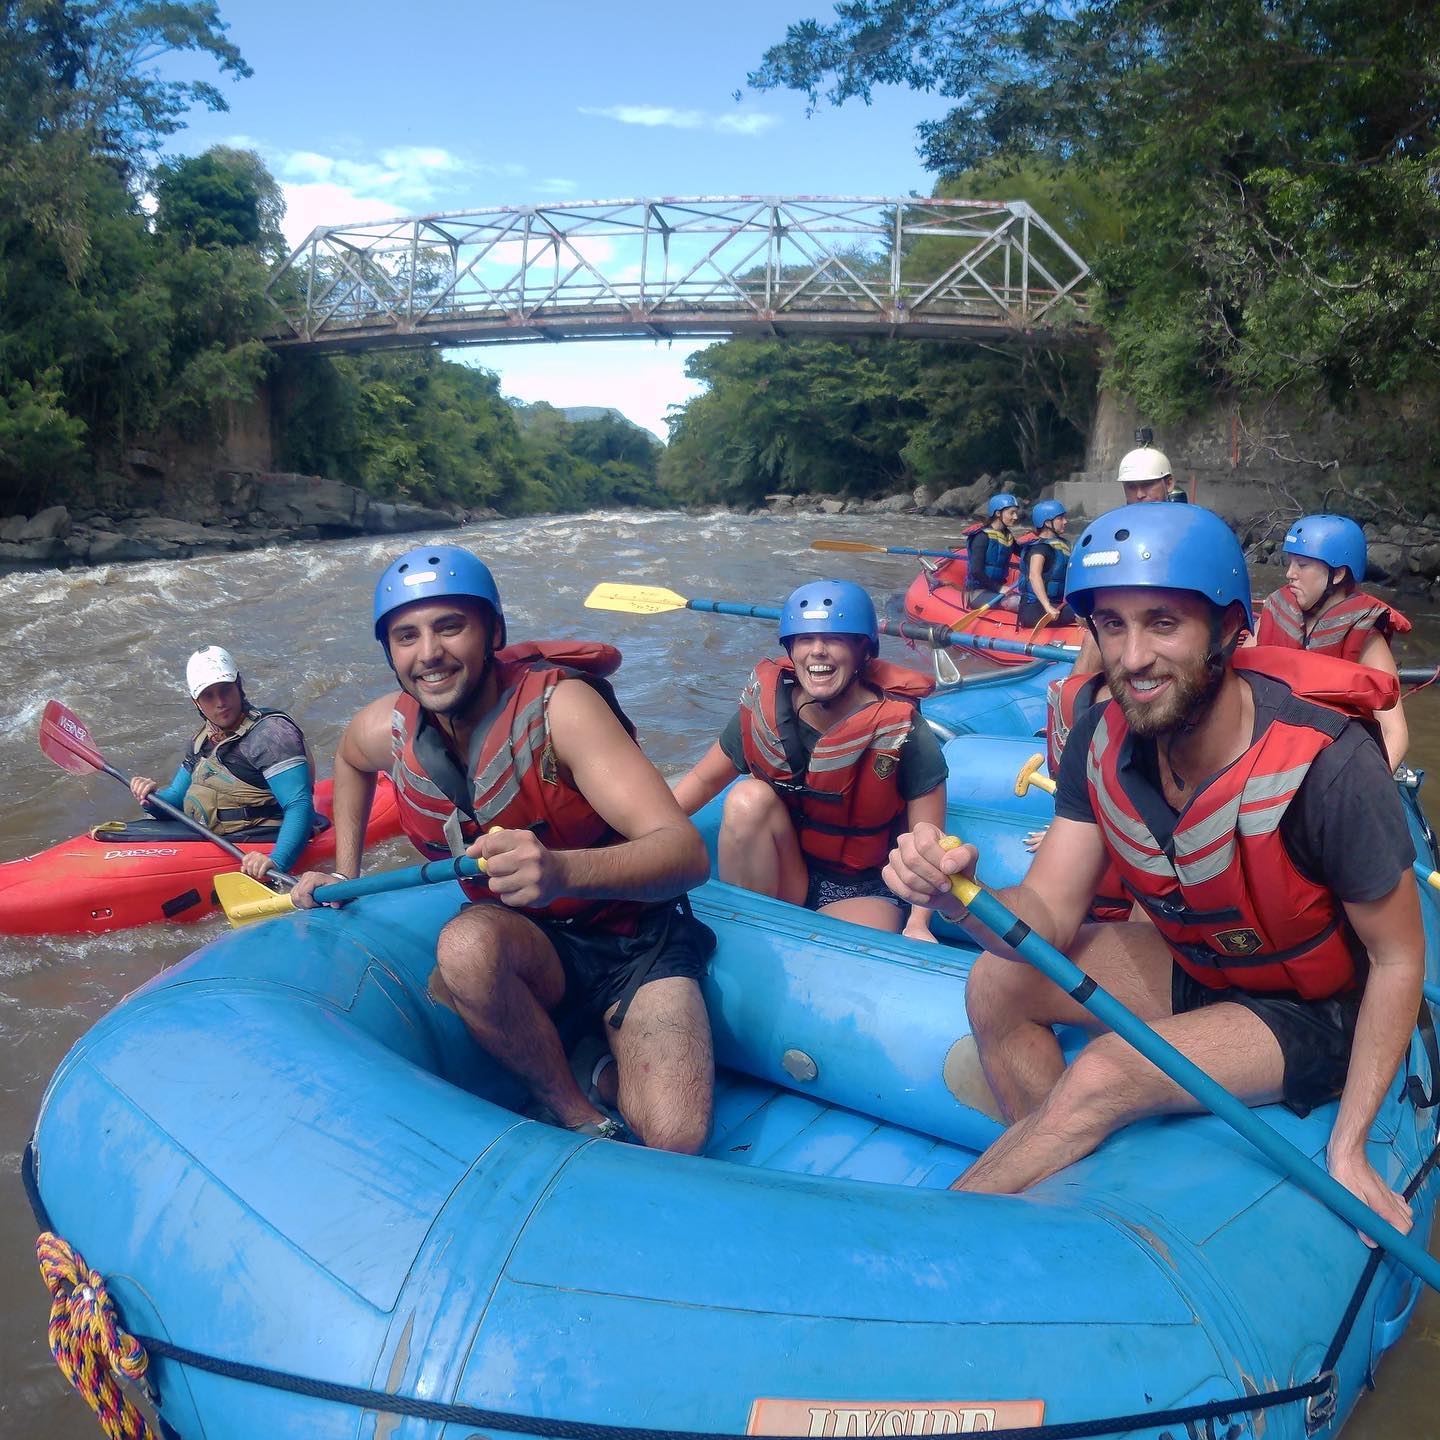 I was so scared for my first rafting experience! But very nice memories ❤️🥰

#worldtrip #wereldreis #raftingcolombia #colombiaraftingexpediciones #worldtrip #colombiaraftingexpeditions #backpackersintheworld #reizen #raftingtrip #rafting🚣 #travelingthroughtheworld